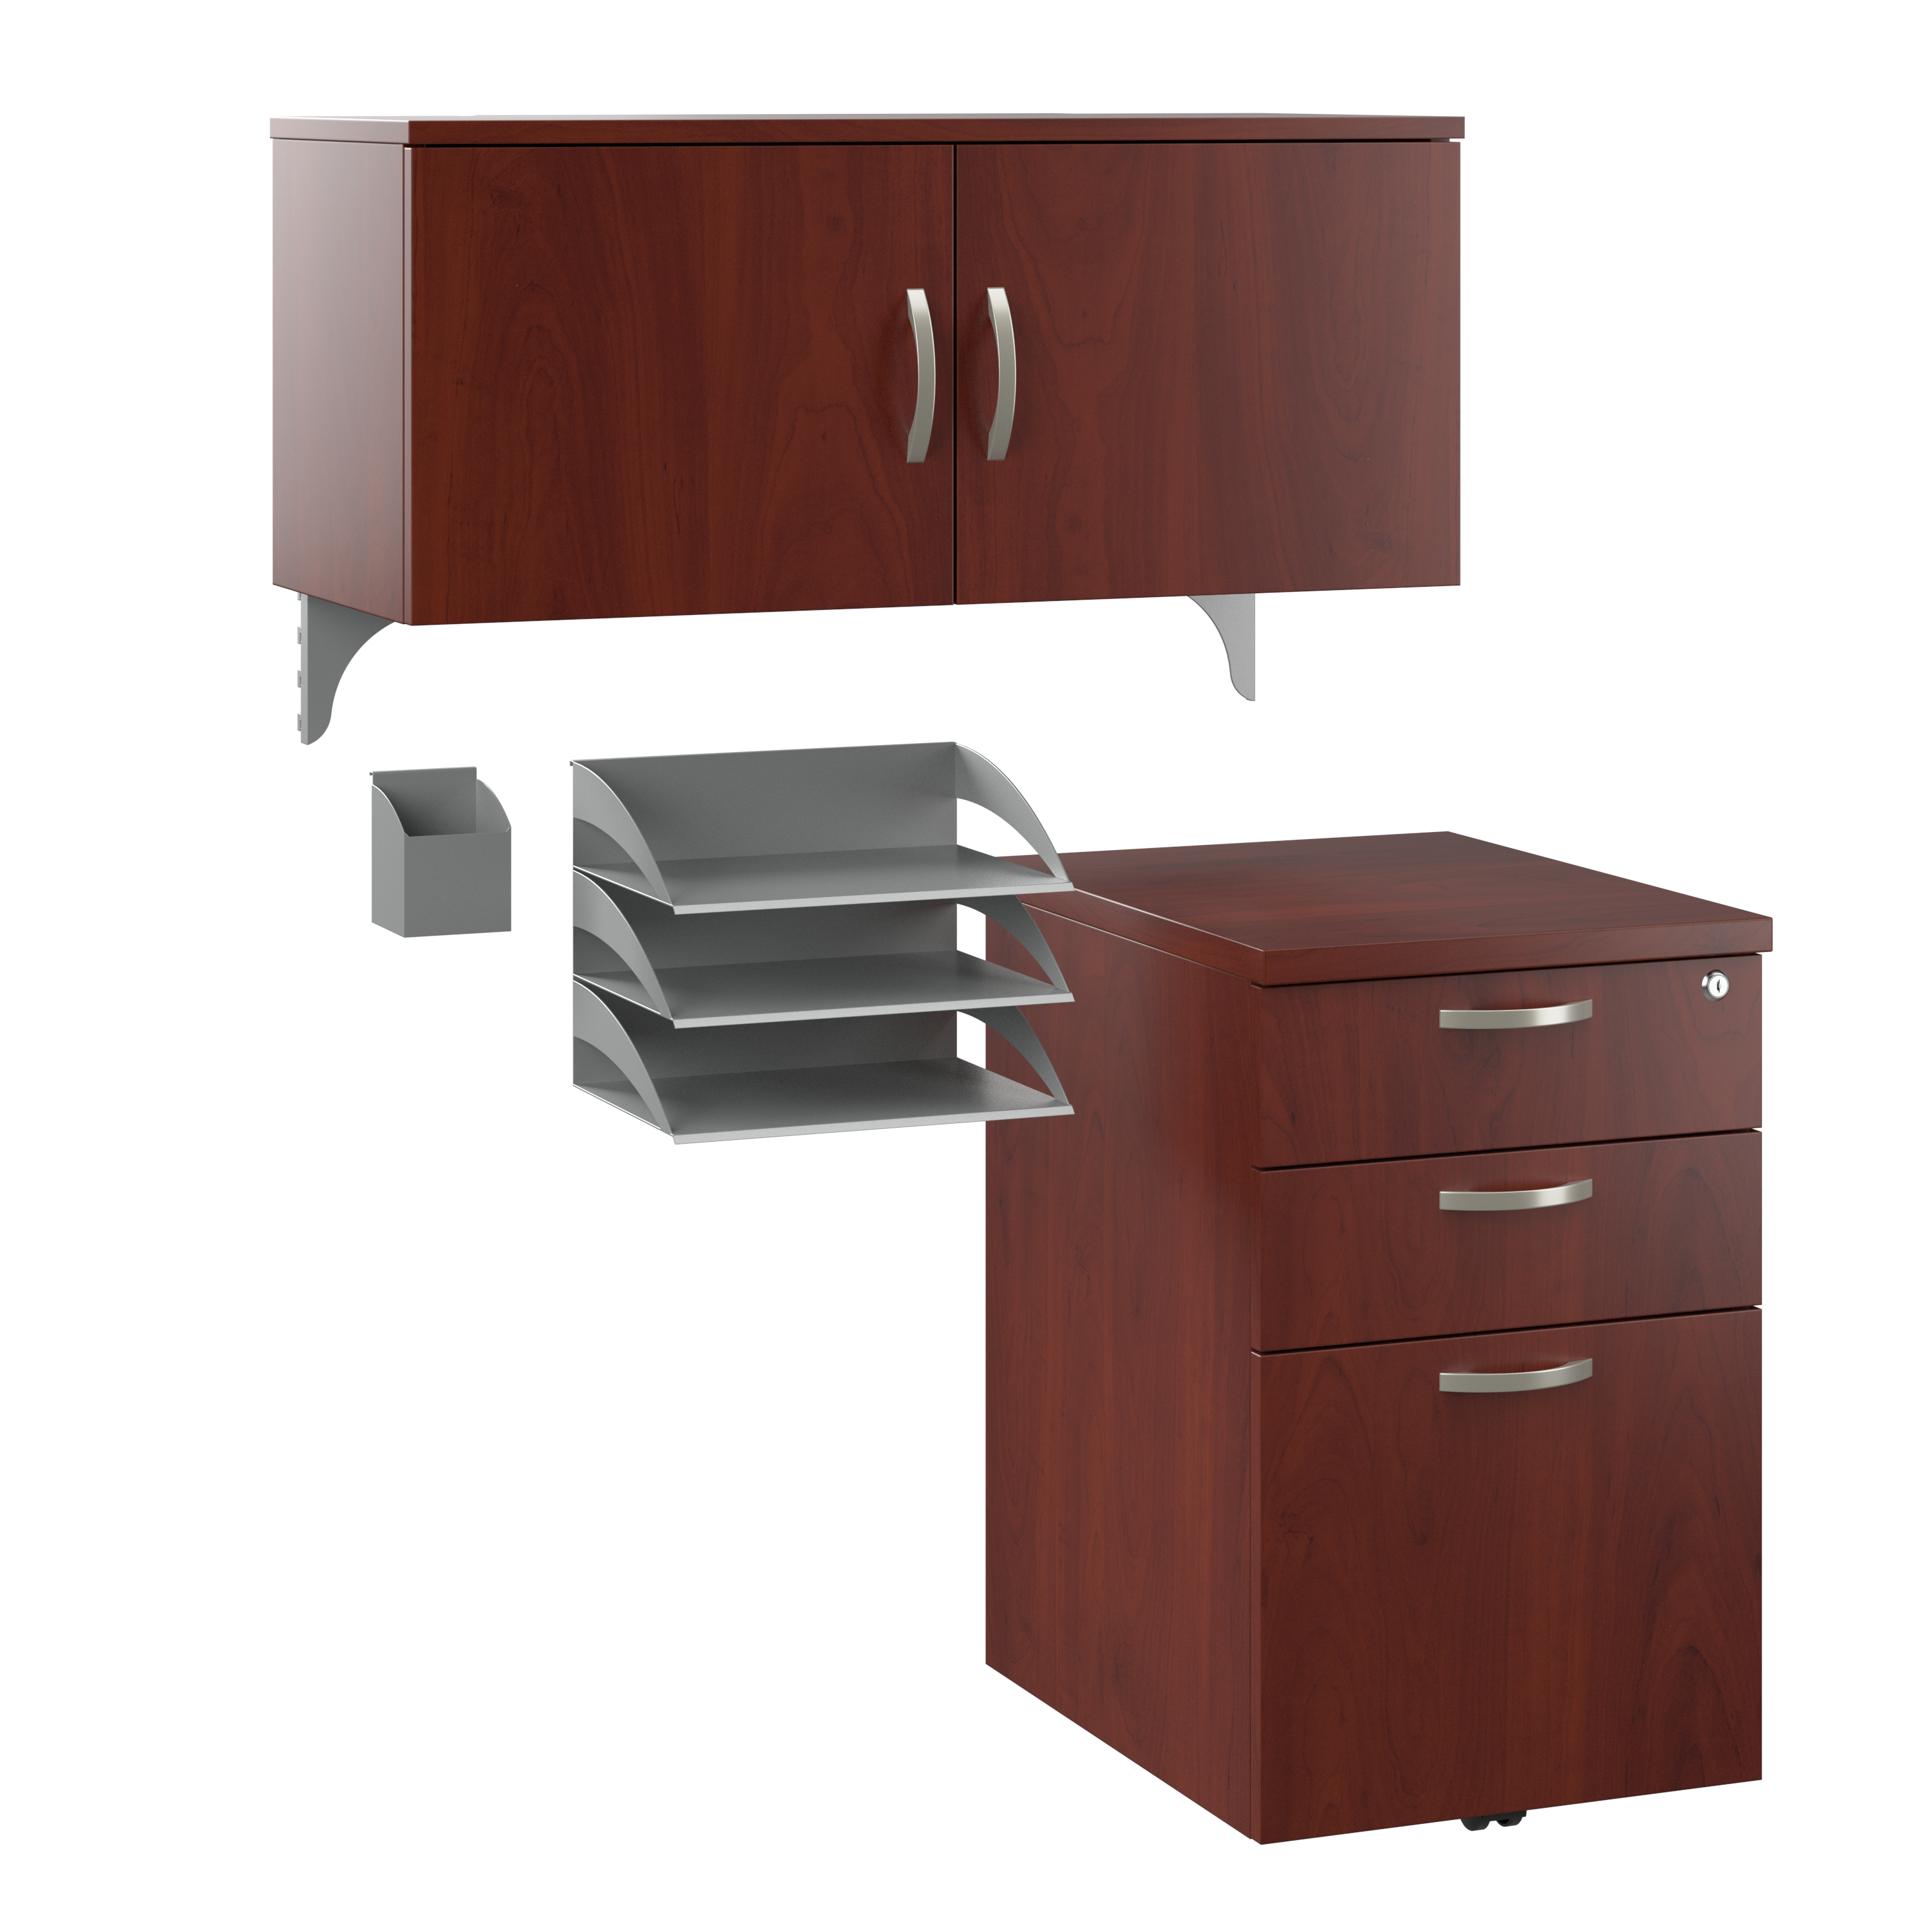 Shop Bush Business Furniture Office in an Hour Cubicle Storage with Cabinet, Drawers, Paper Tray, and Pencil Holder 02 WC36490-03K #color_hansen cherry